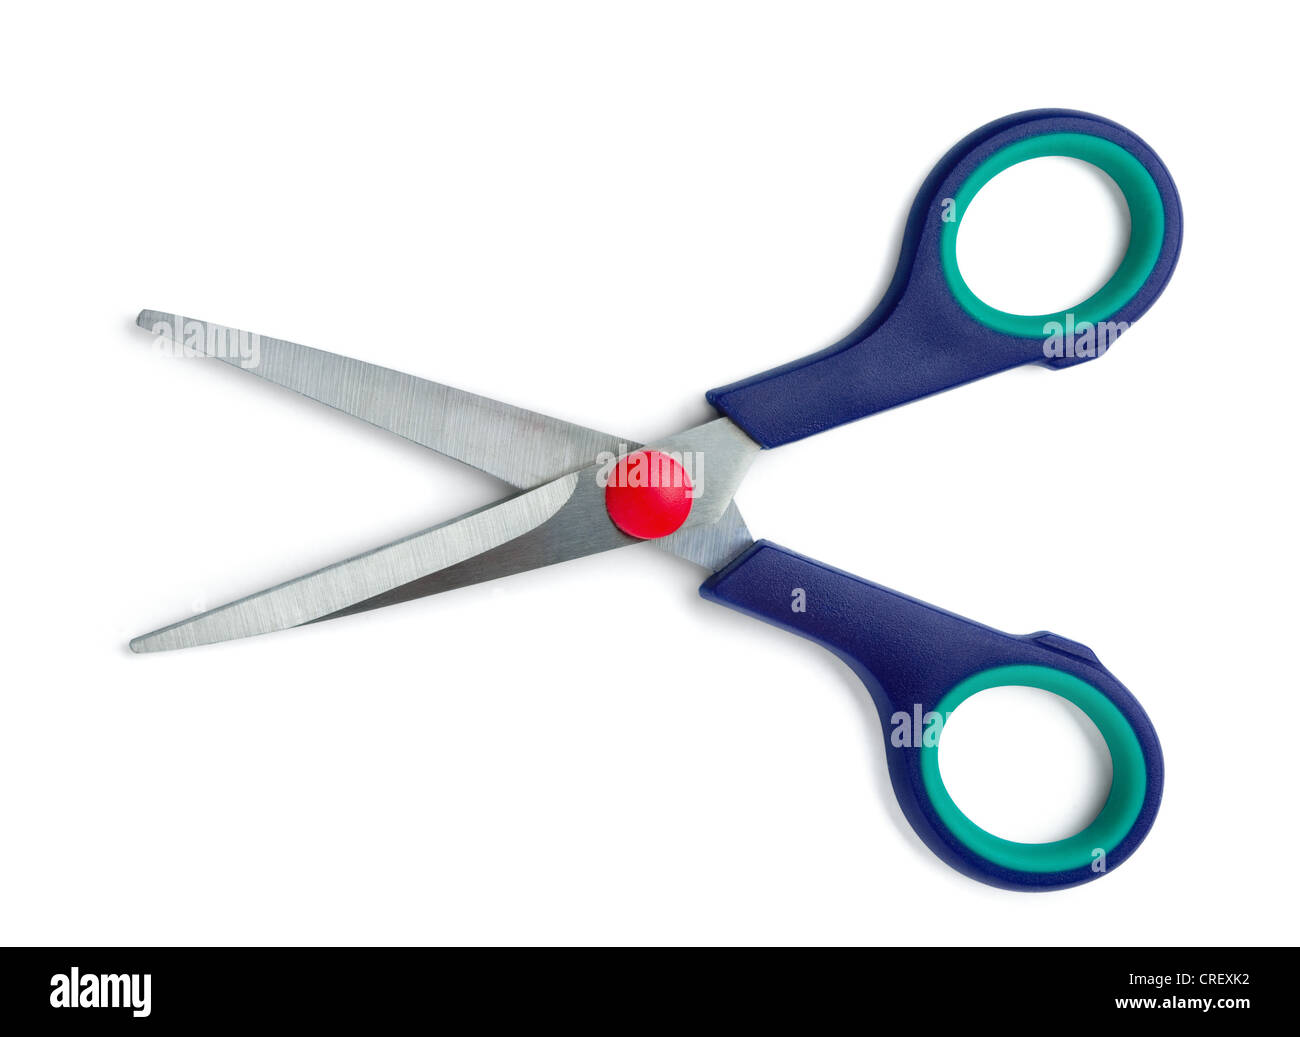 Pair of blue handled scissors isolated on white Stock Photo